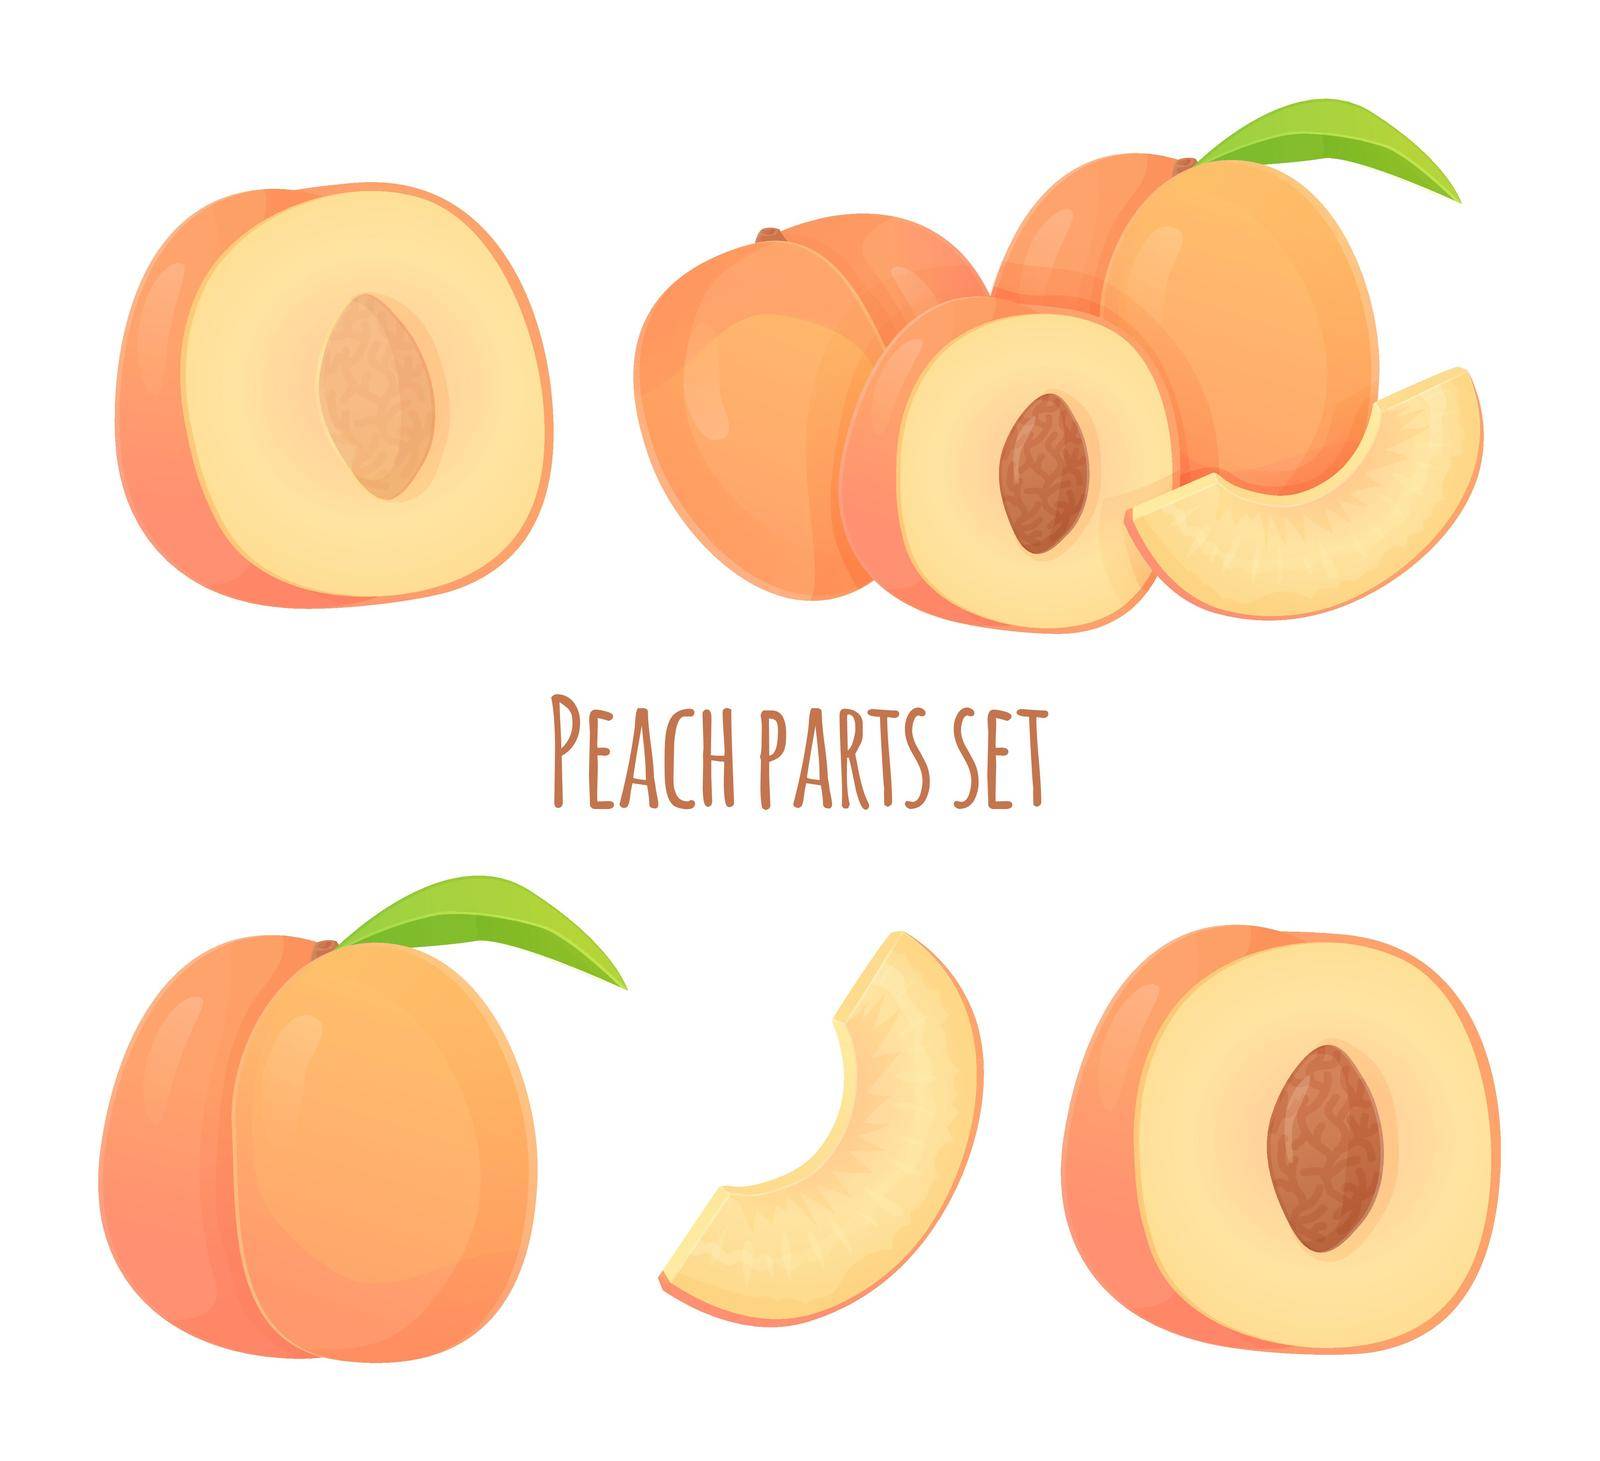 Set of peaches in different shapes, slice, half with seed and without , whole fruit. Can be used for healthy diet, harvest natural eco food concept. Stock vector illustration in realistic cartoon style by Daaridna